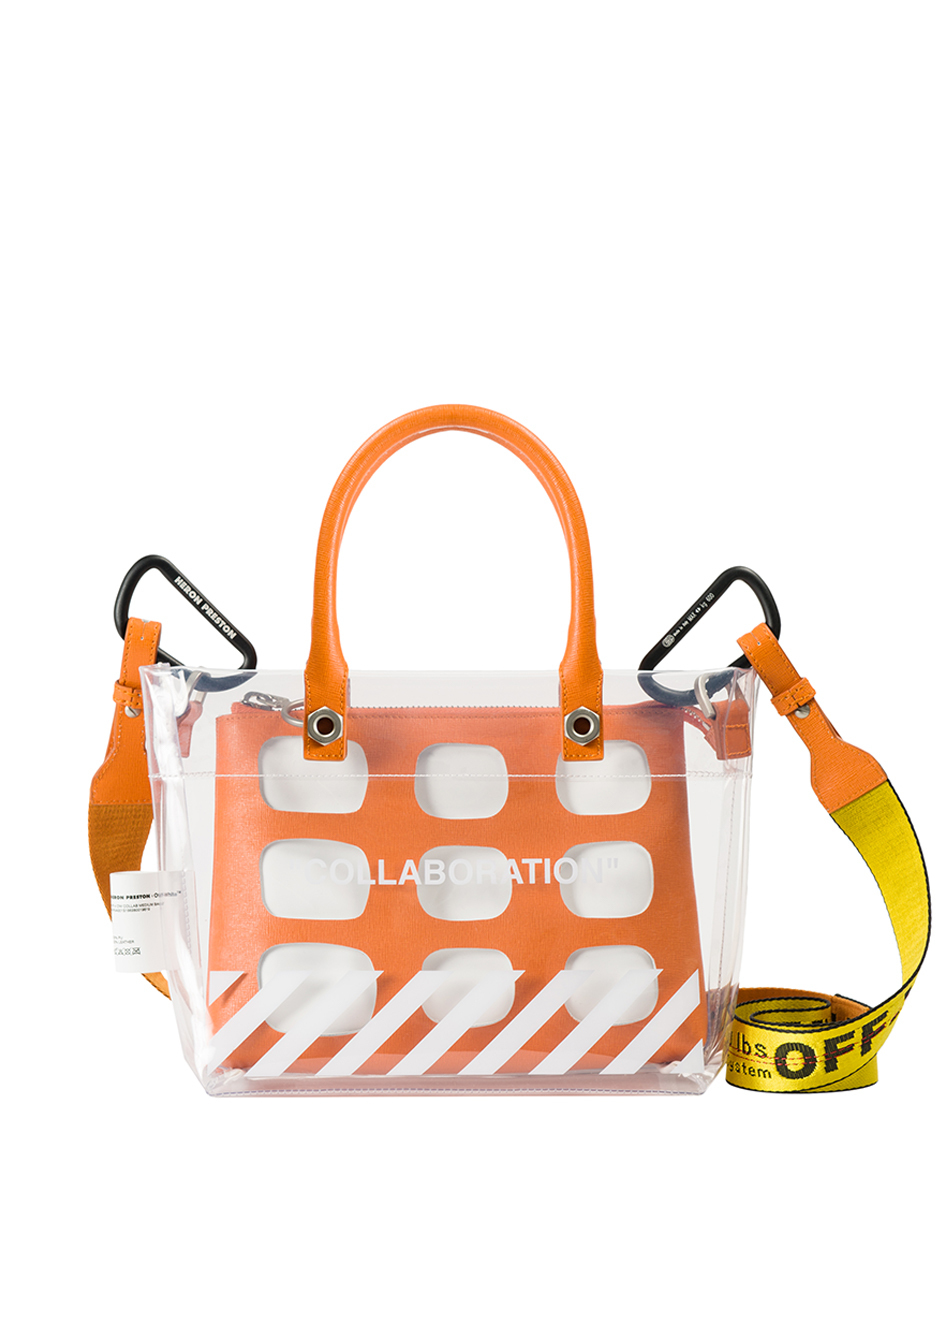 Off-White and Heron Preston Have Collaborated on A Unisex Bag 